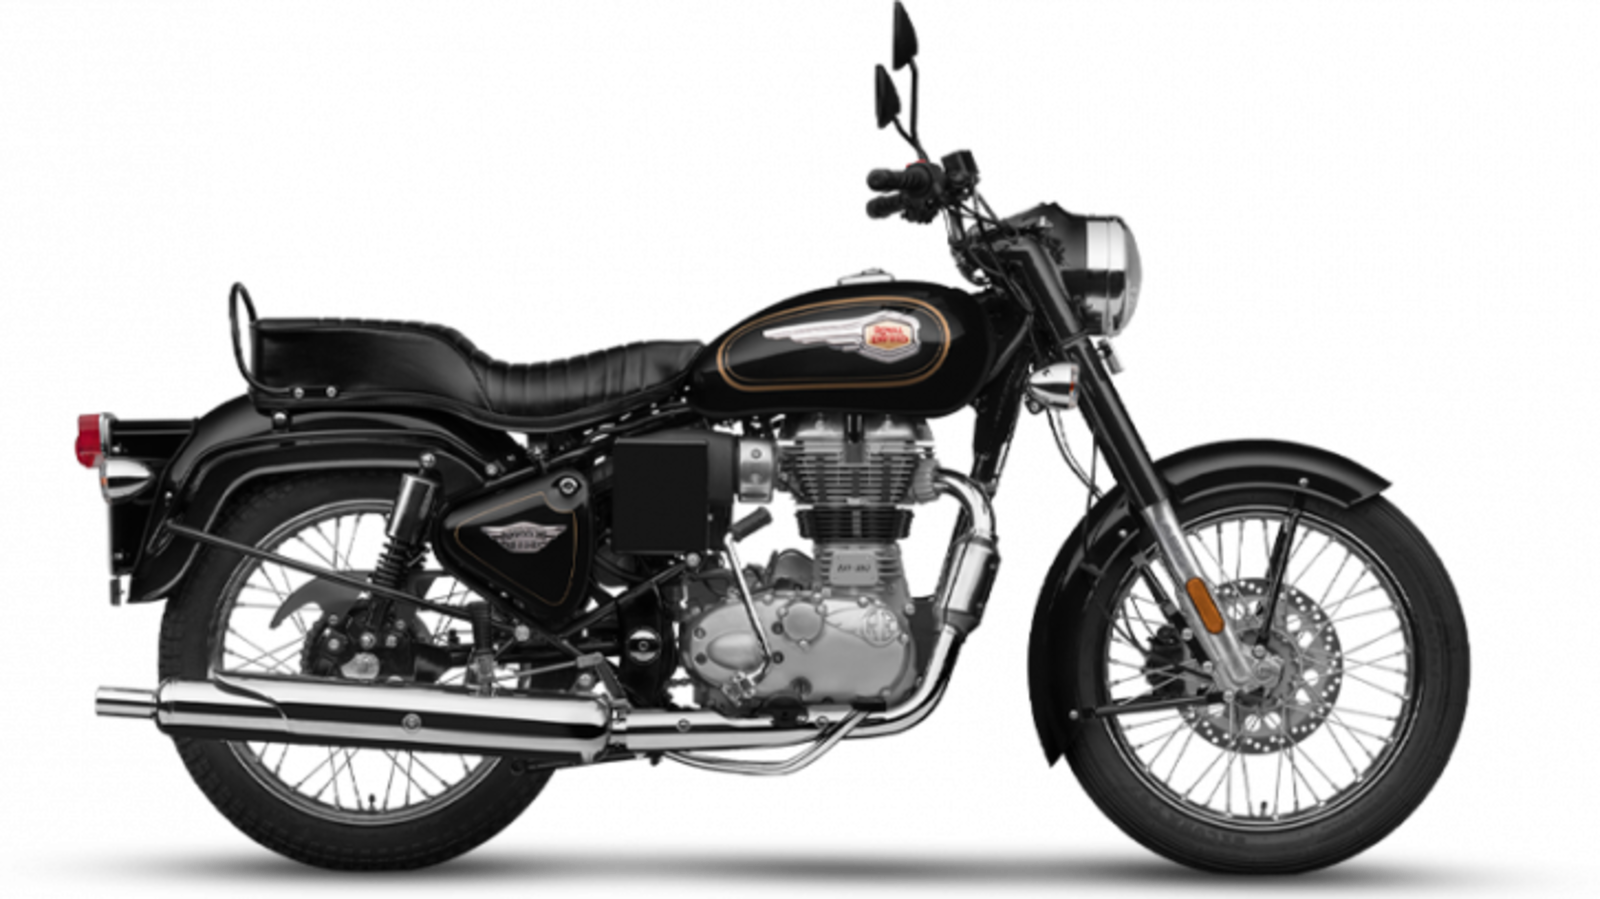 Royal Enfield hikes prices of Bullet 350 BS 6 | HT Auto